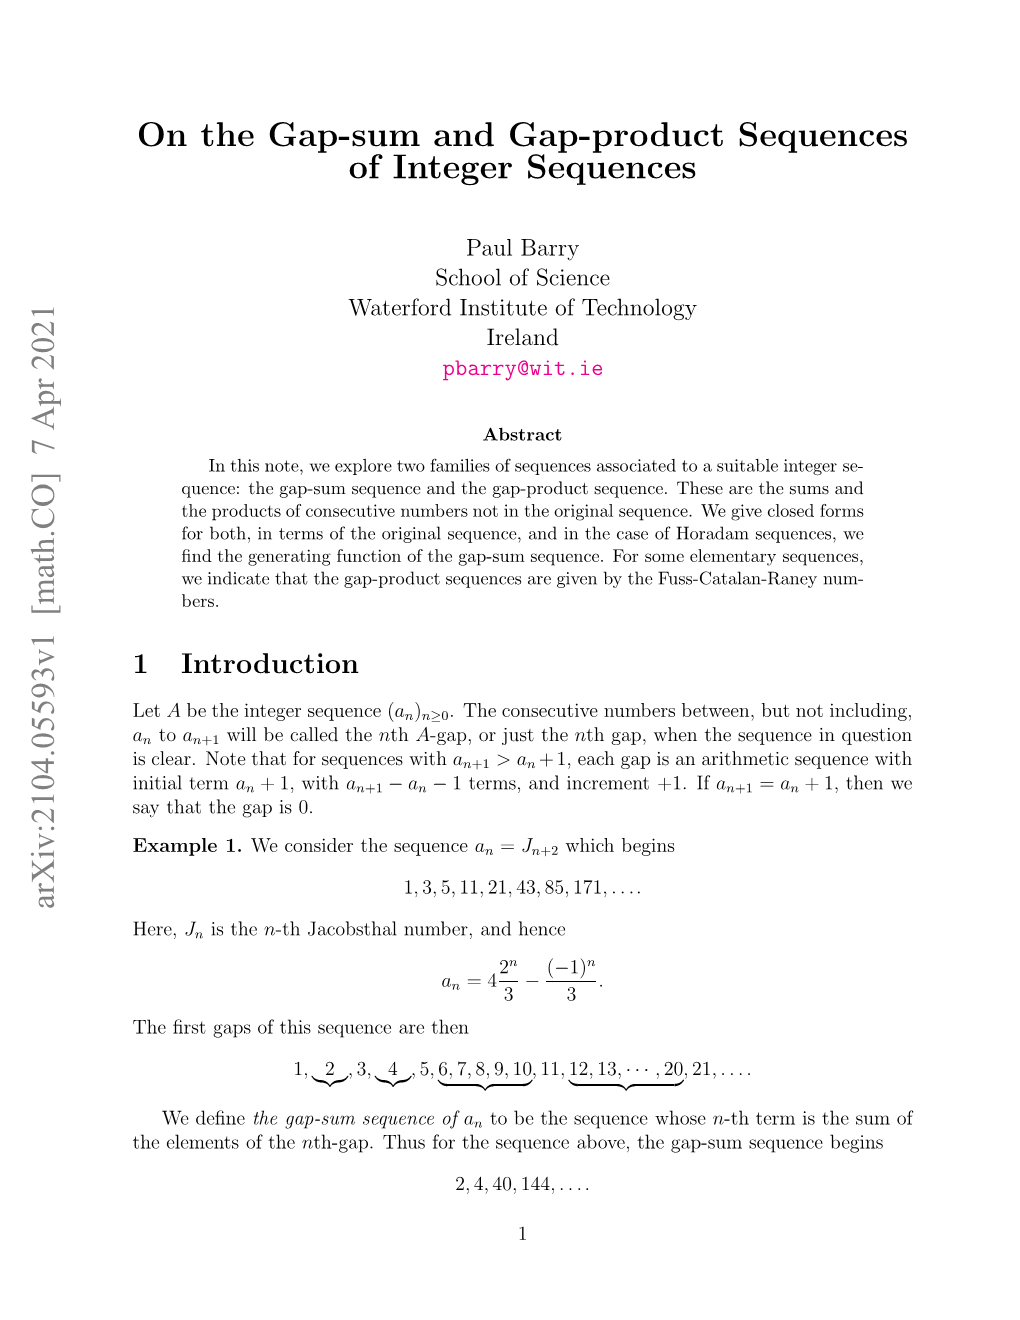 On the Gap-Sum and Gap-Product Sequences of Integer Sequences